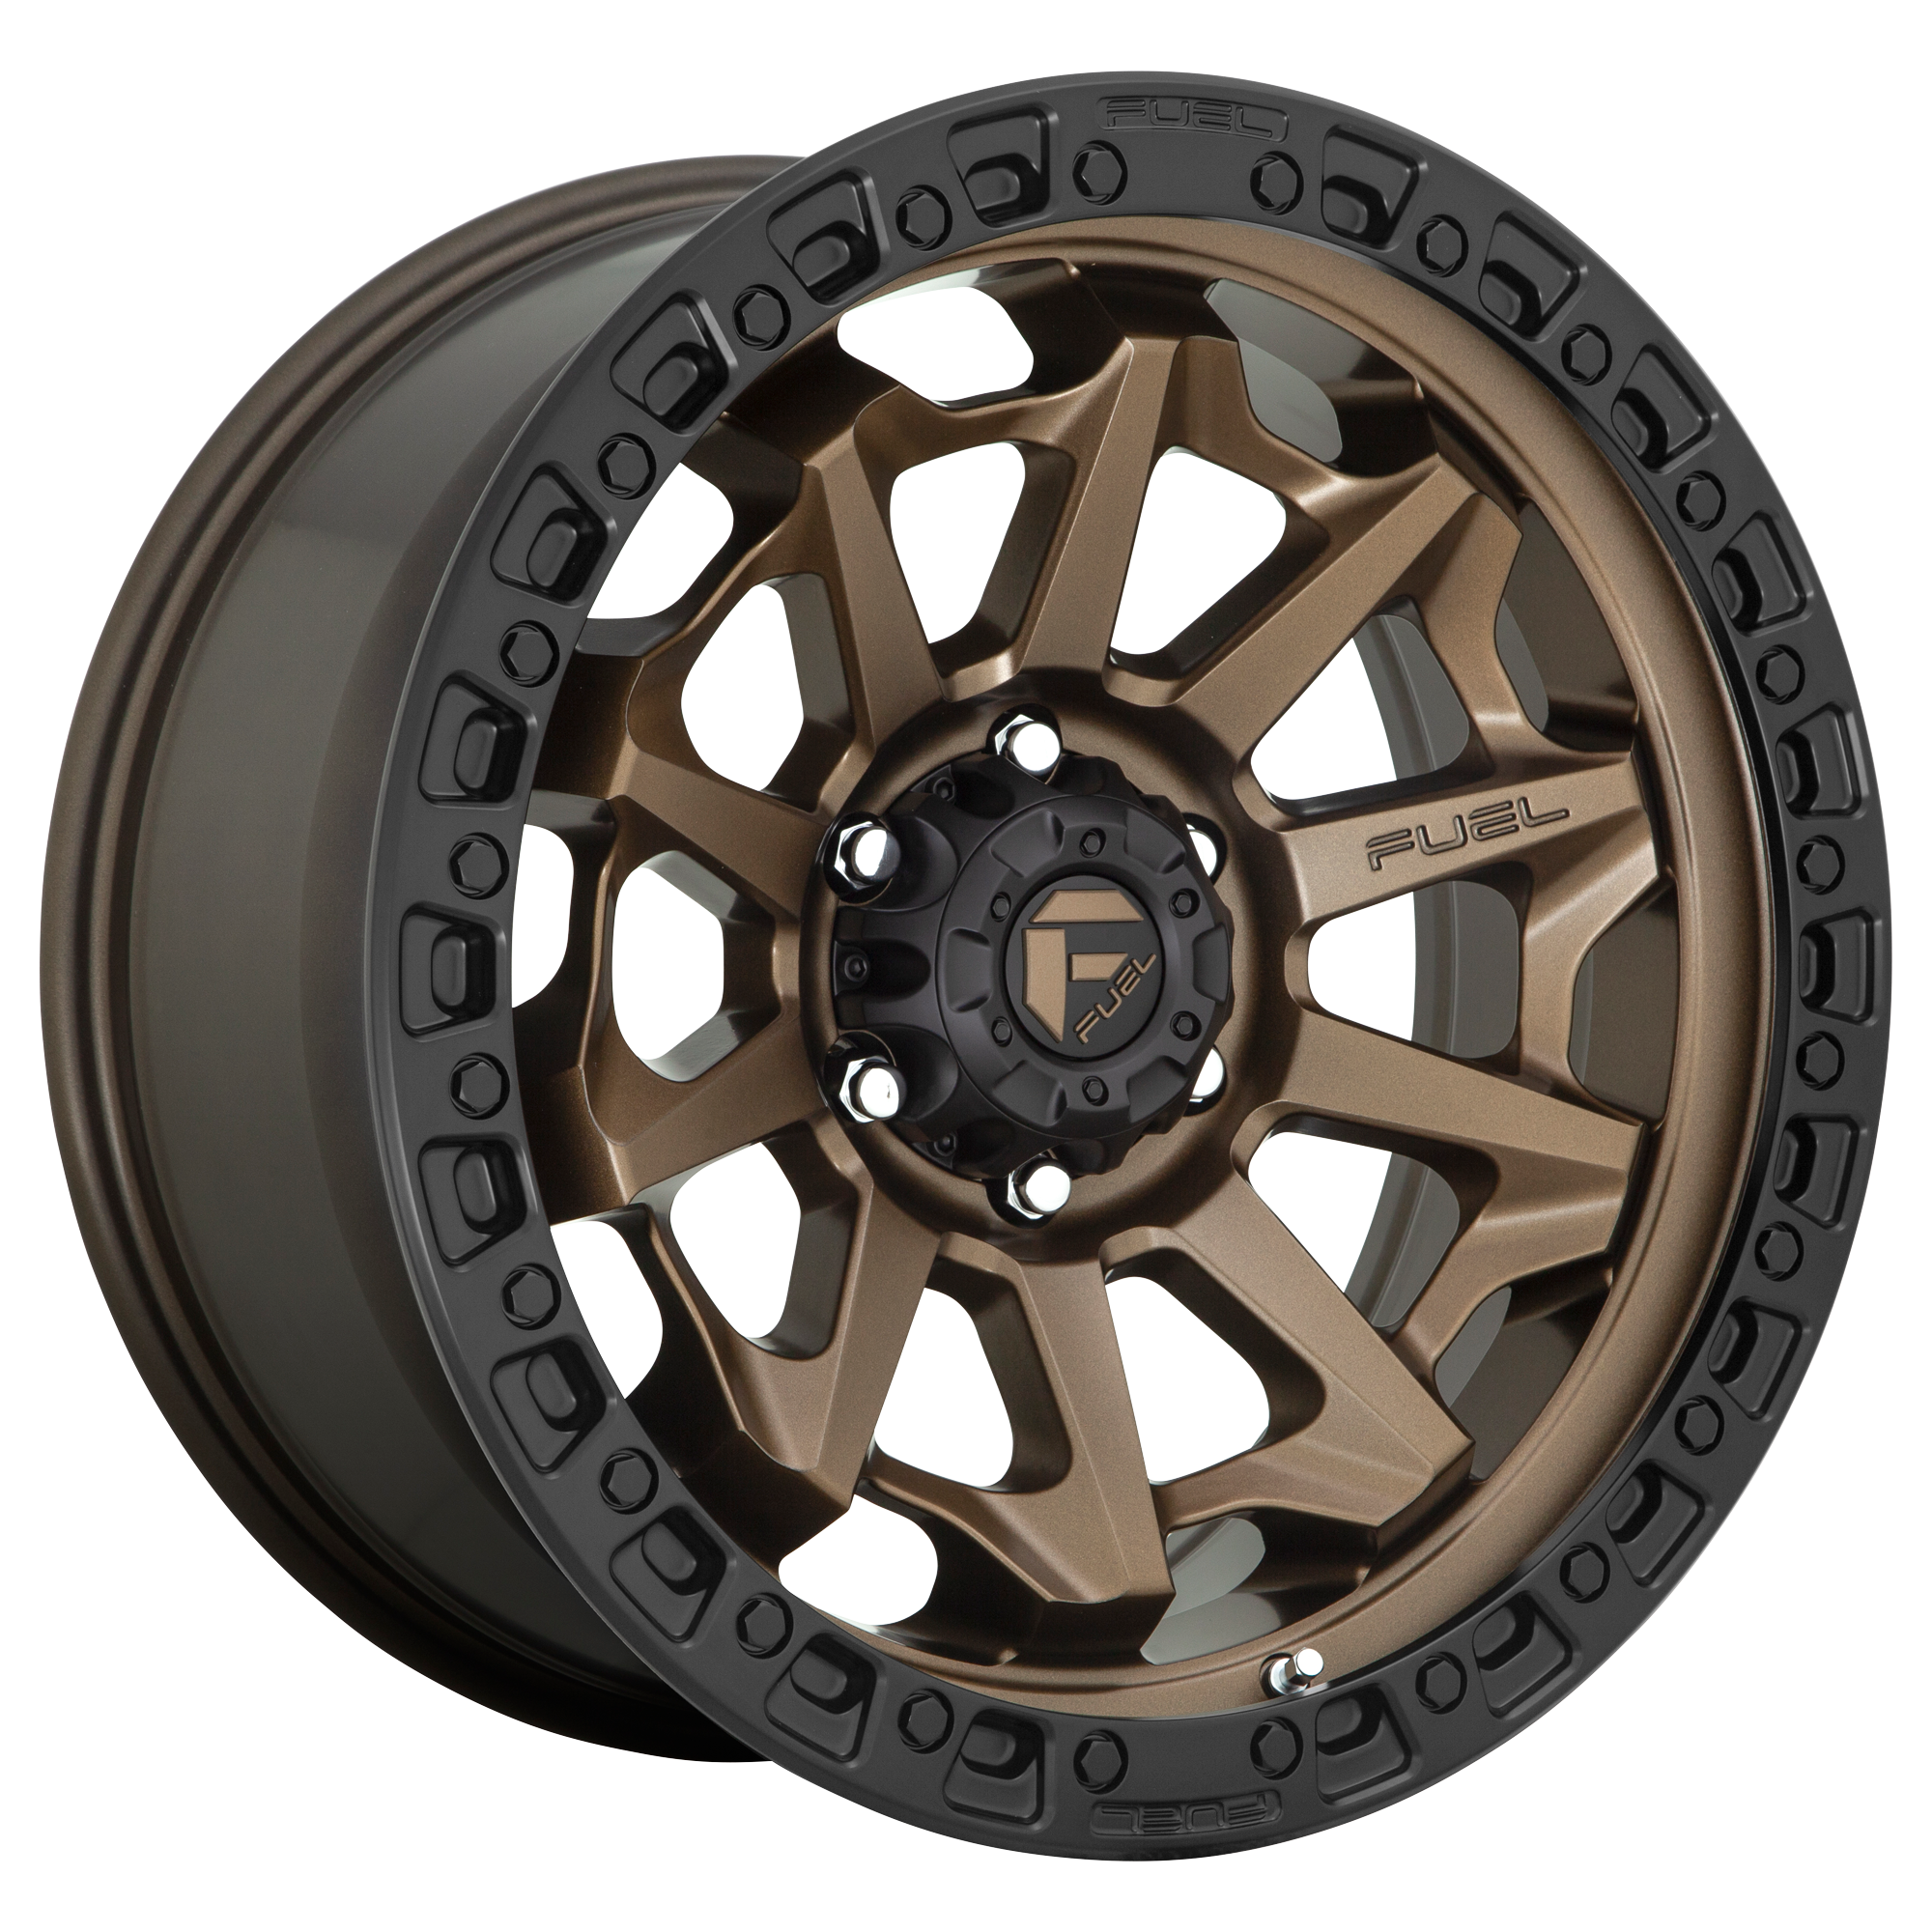 COVERT 20x10 8x165.10 MATTE BRONZE BLACK BEAD RING (-18 mm) - Tires and Engine Performance